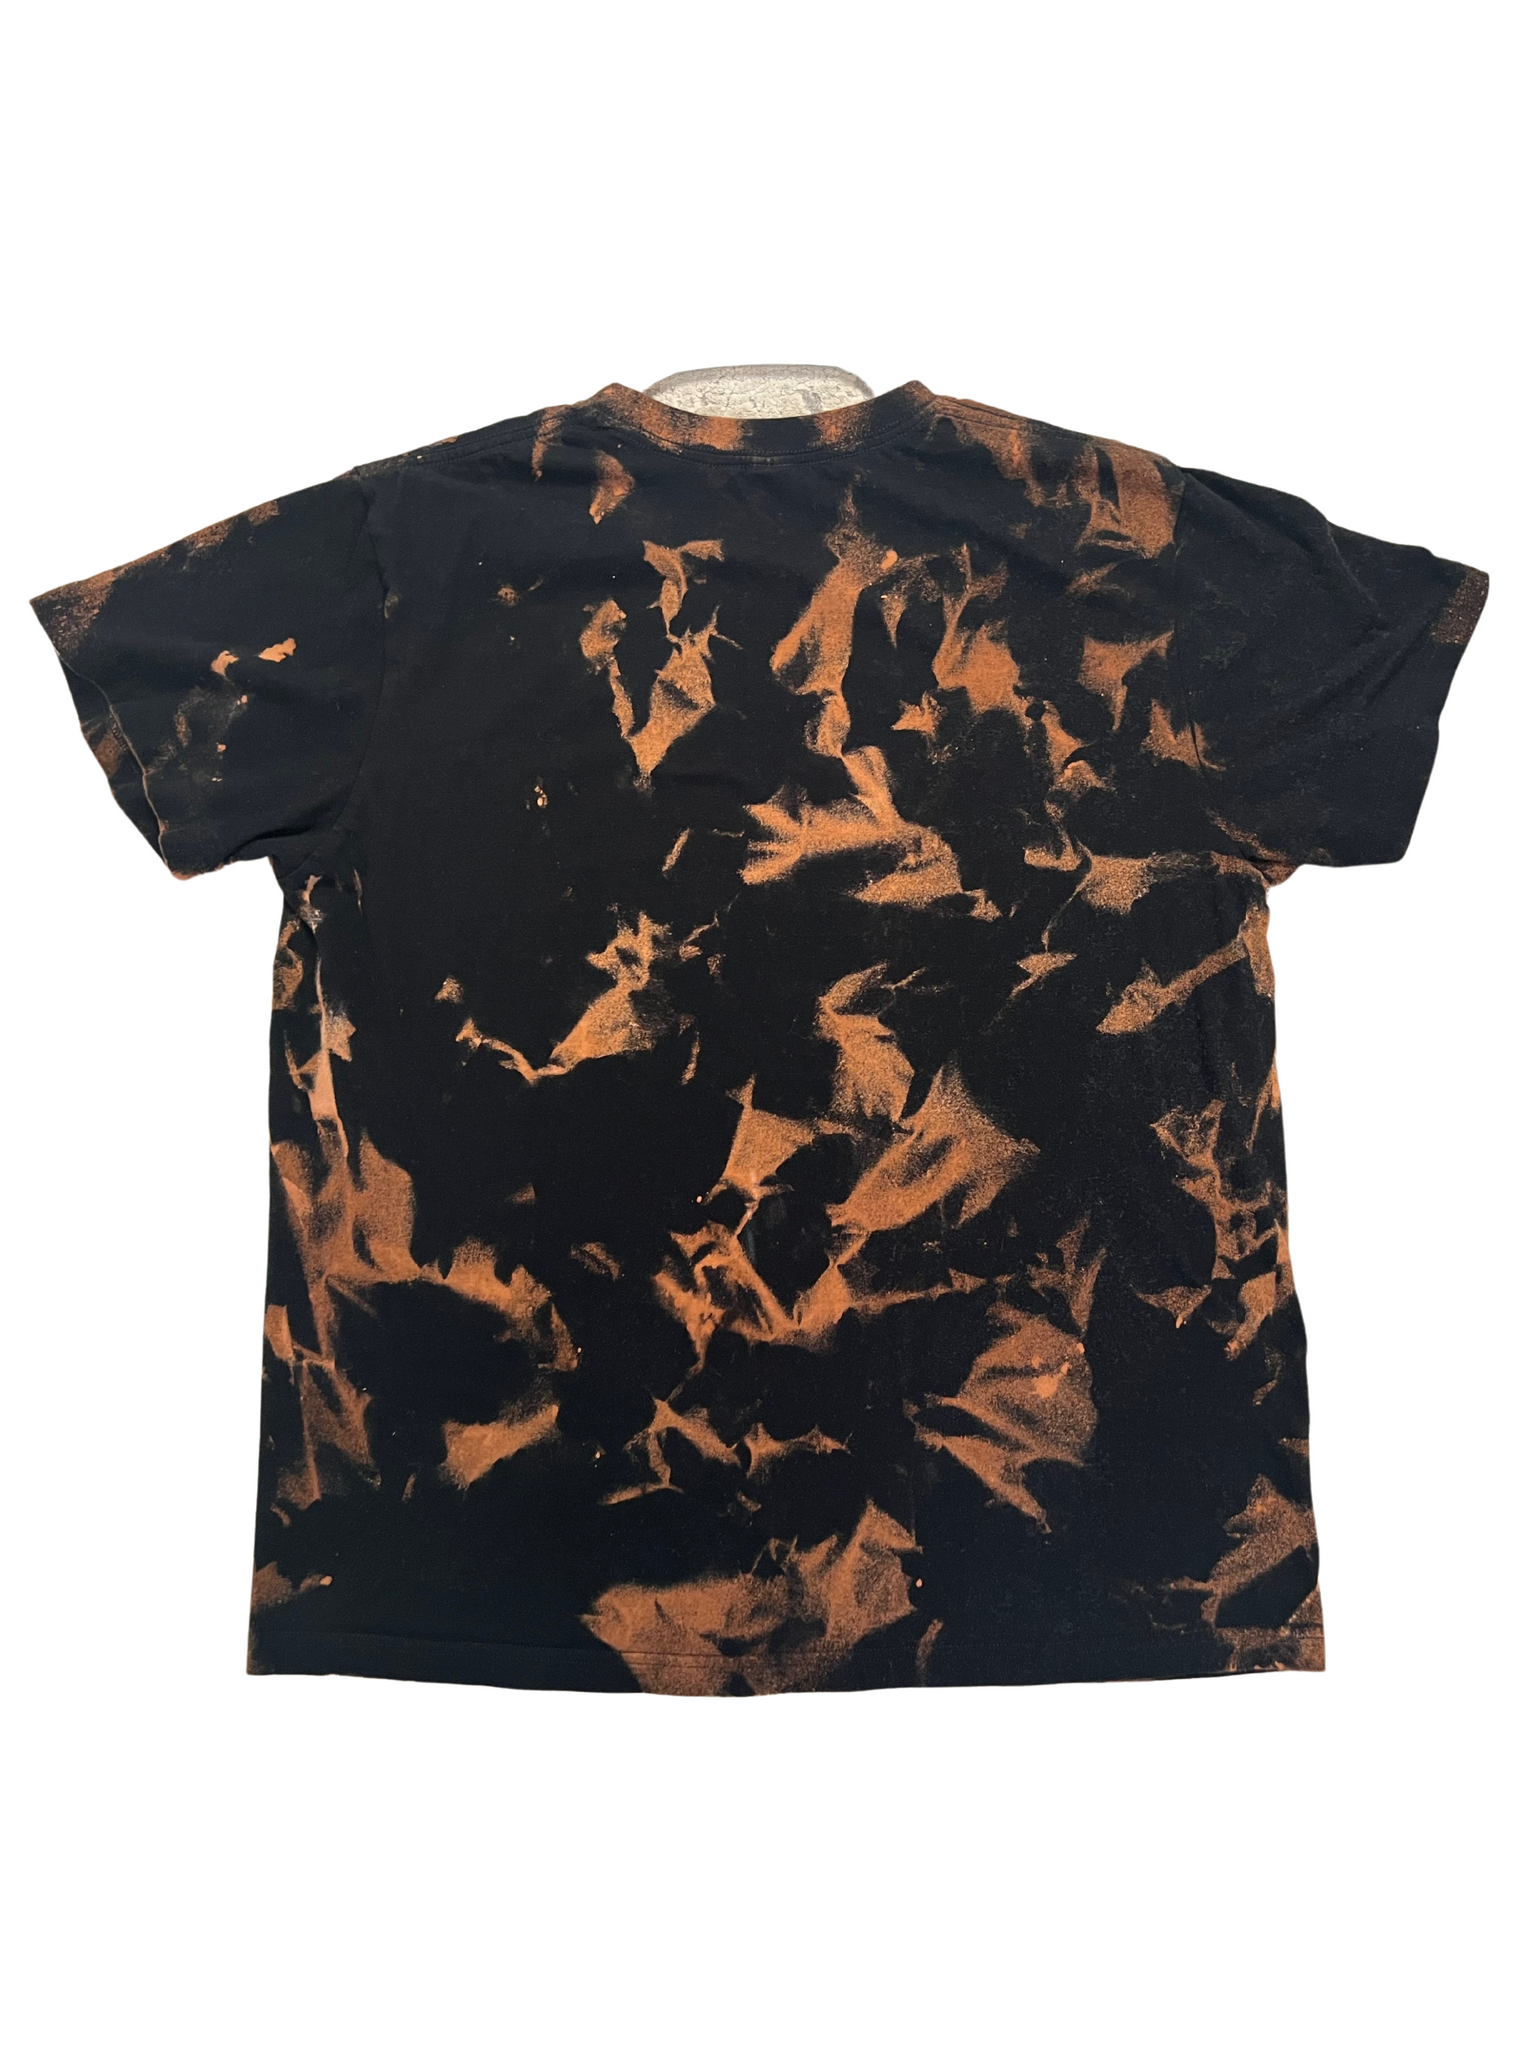 Red Hot Chili Peppers Bleached Shirt